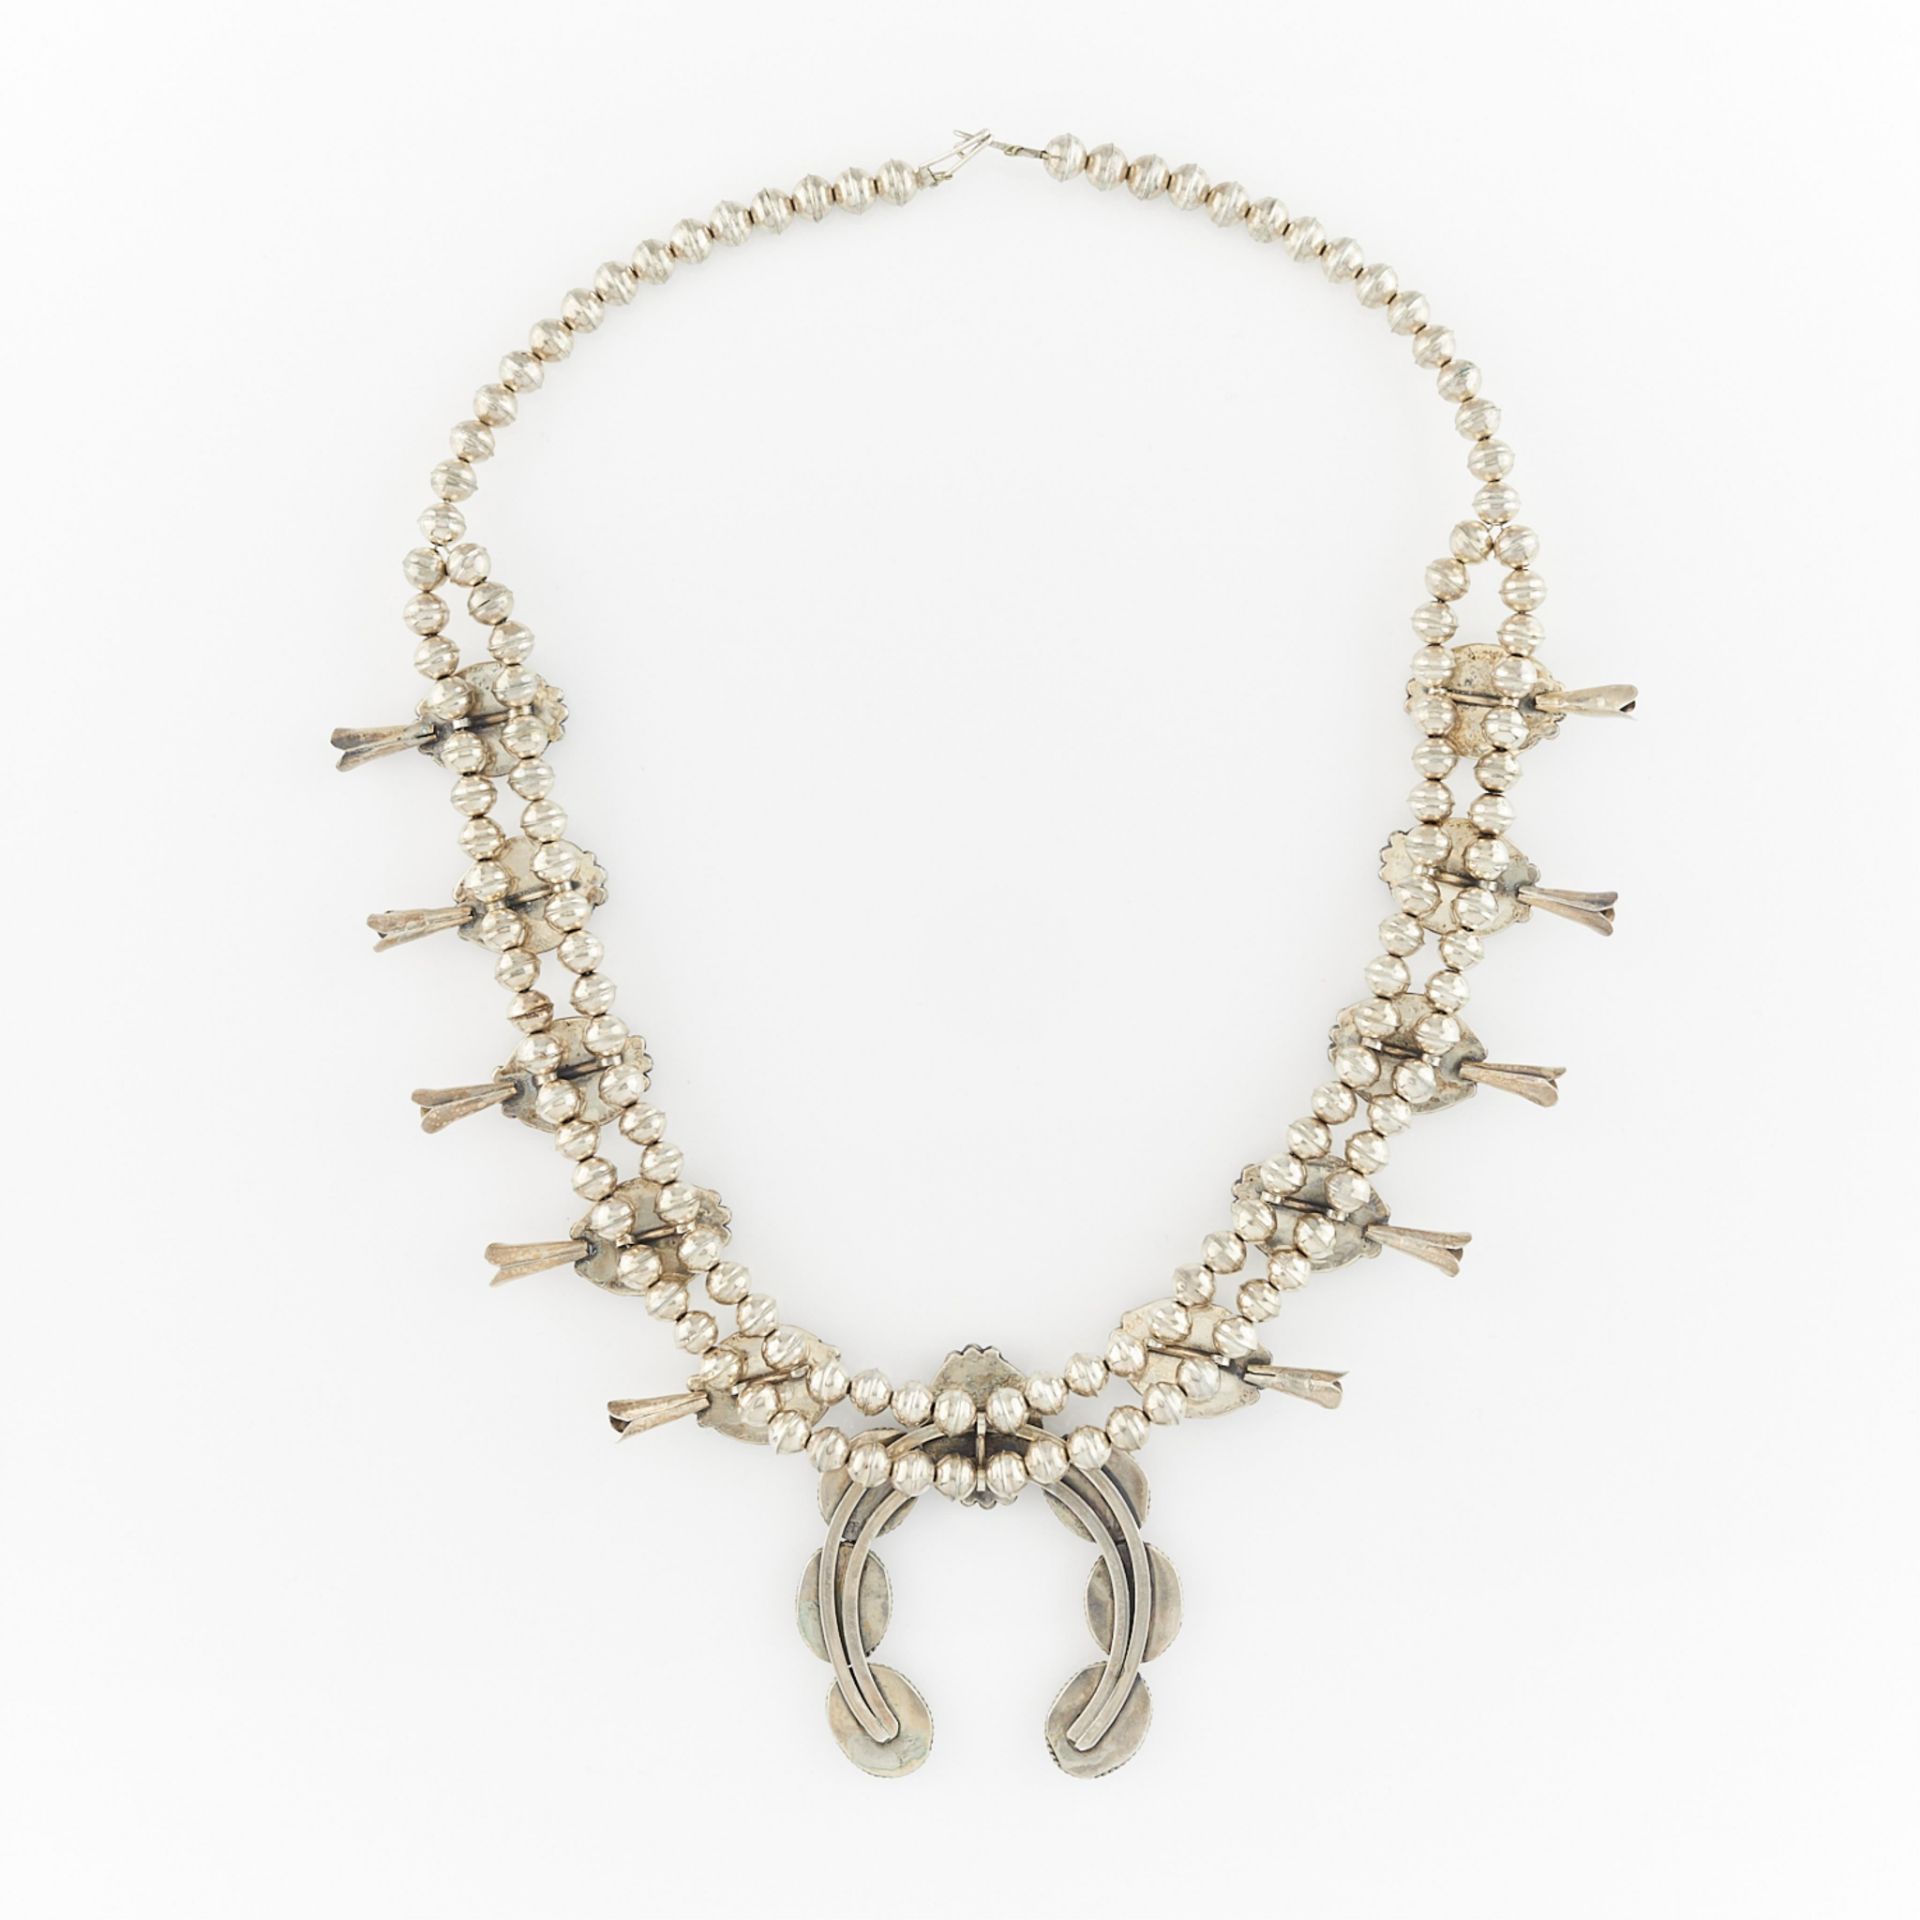 Shell Squash Blossom Necklace - Image 6 of 6